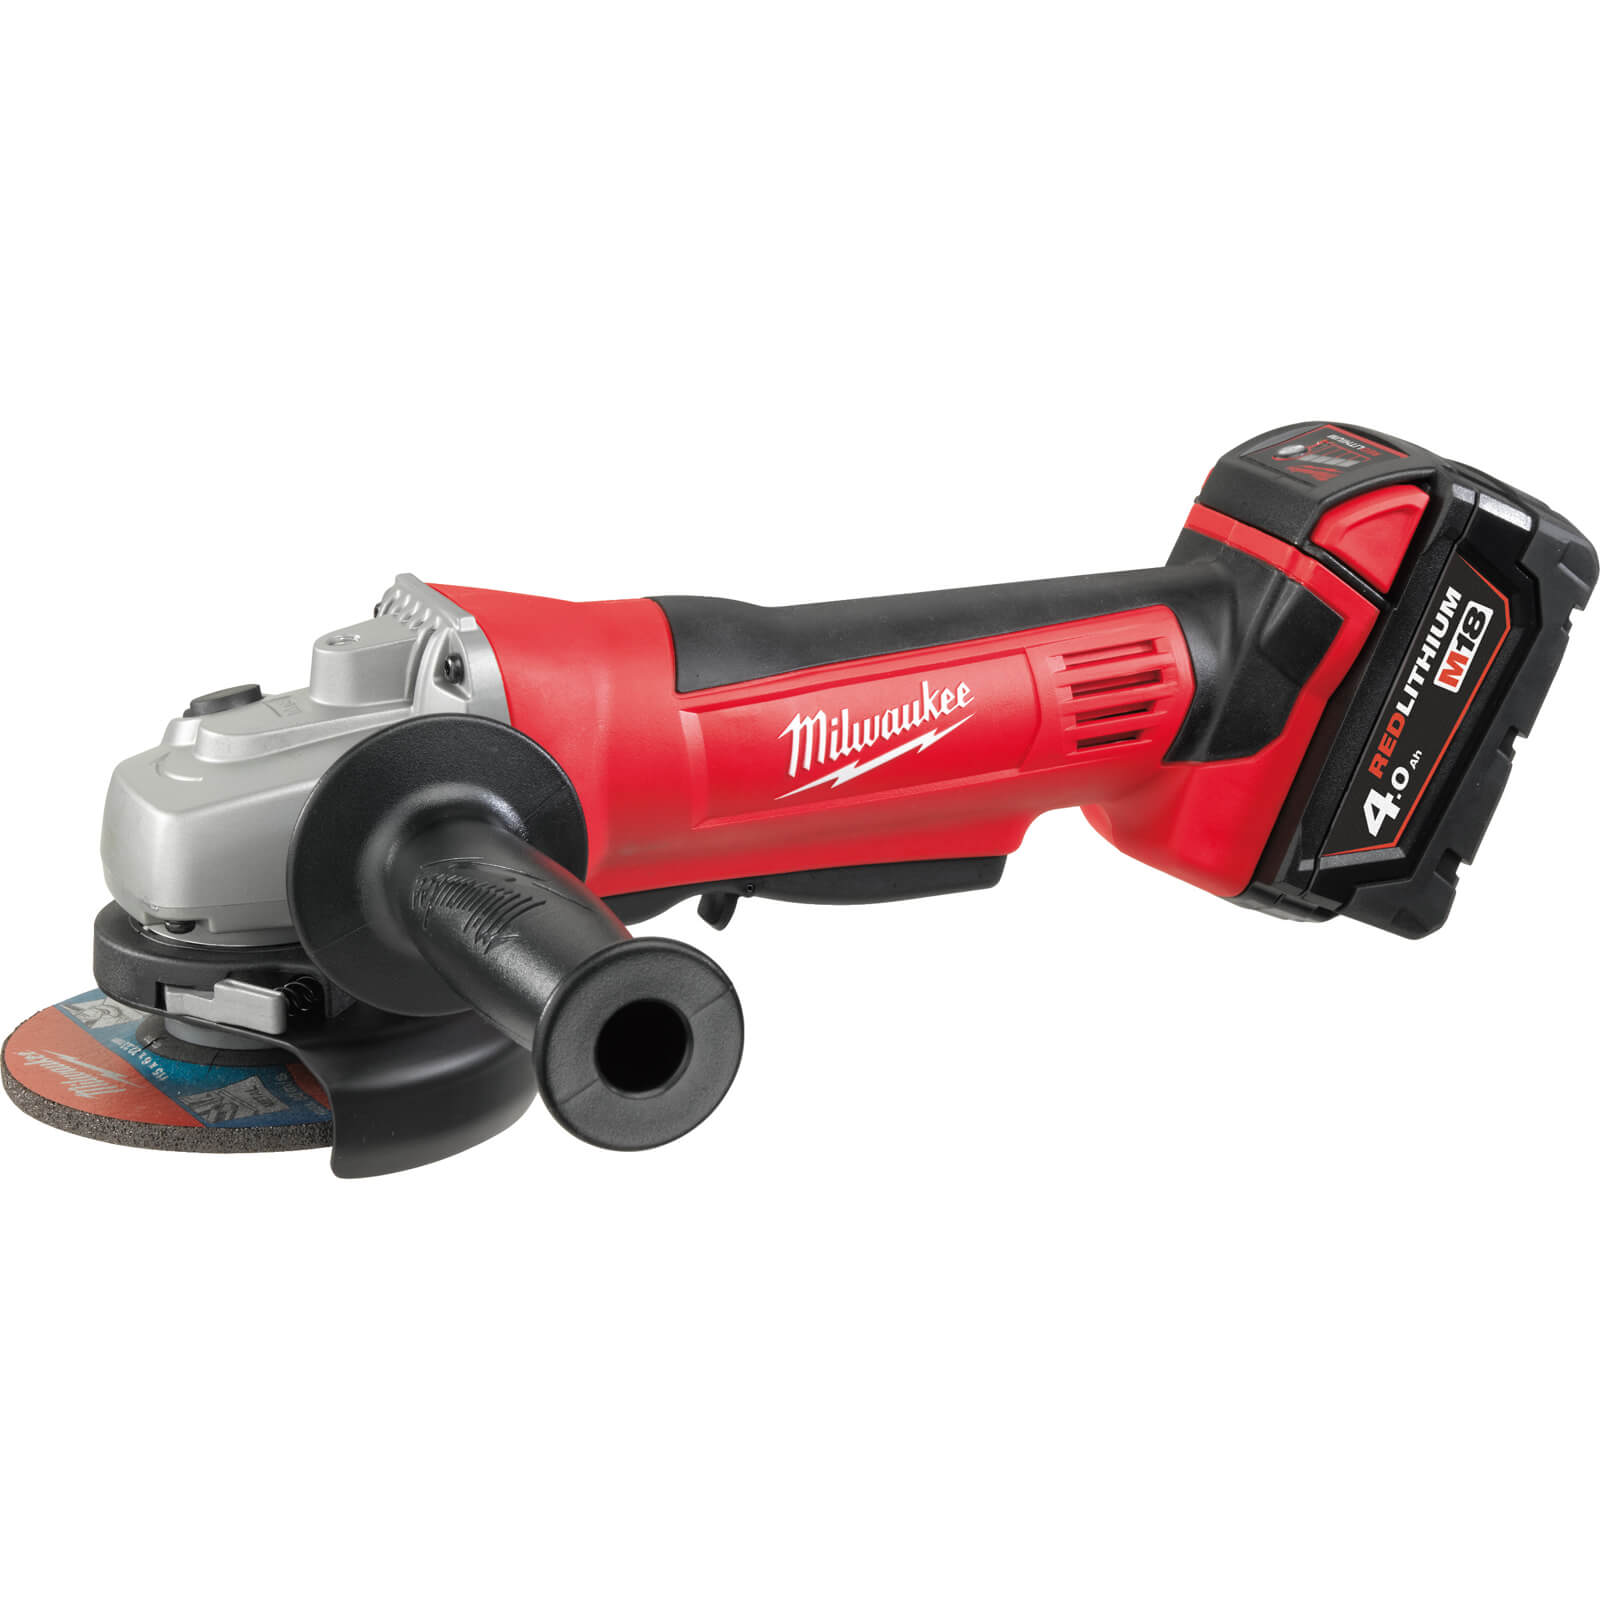 Image of Milwaukee HD18 AG-115 18v Cordless Angle Grinder 115mm 2 x 4ah Li-ion Charger Case